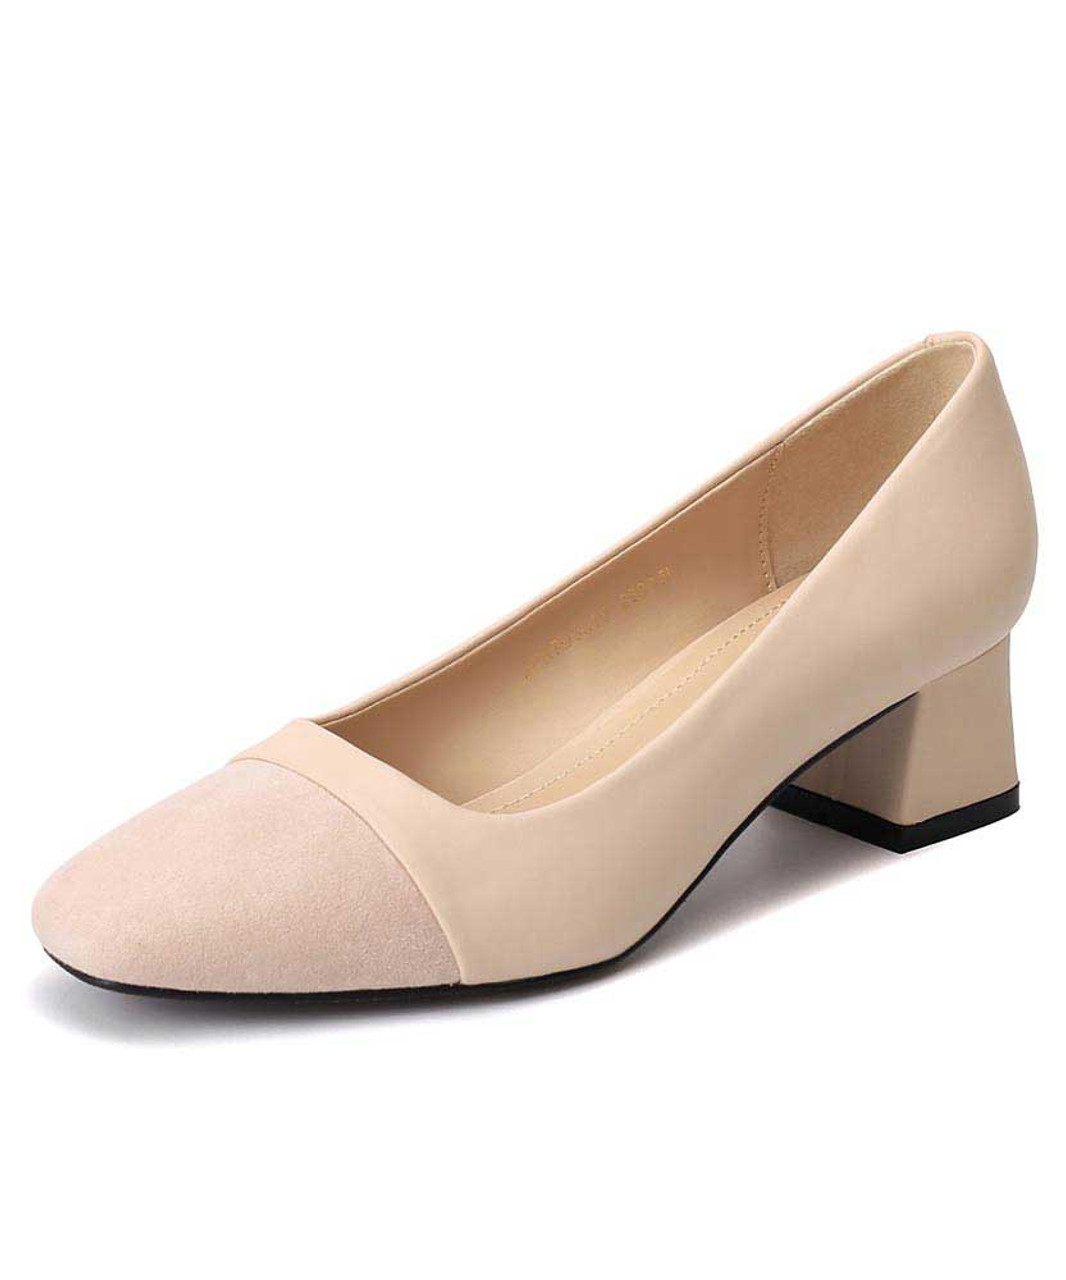 Women's Low Heels Suede Leather Block Casual Square Toe Slip On Chunky  Pumps Shoes 1.5 Inch